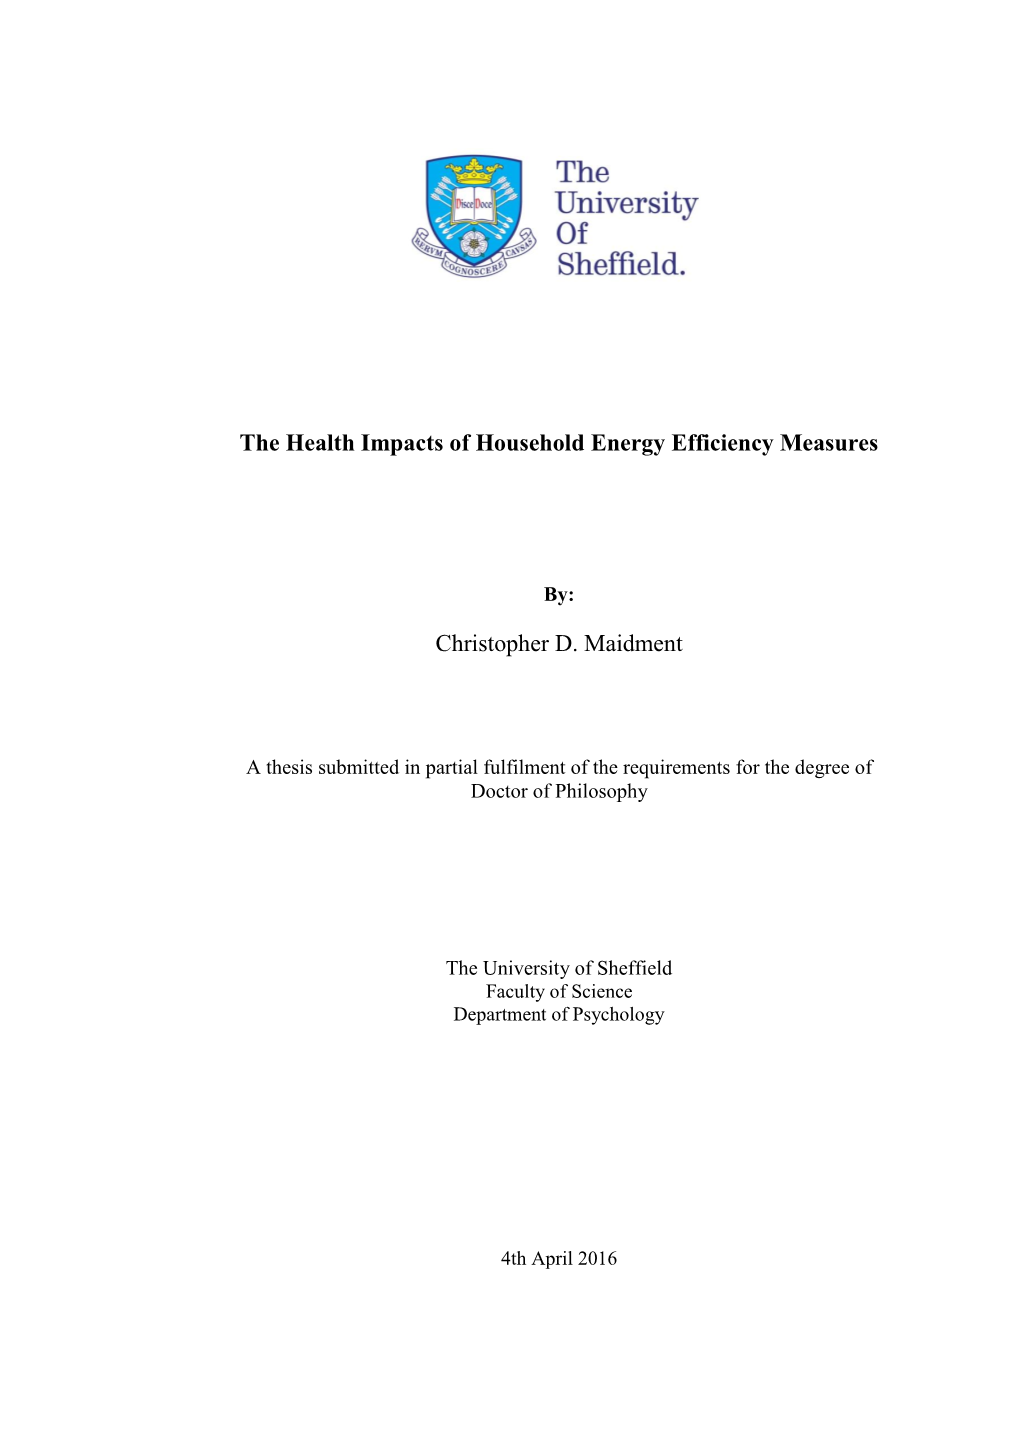 The Health Impacts of Household Energy Efficiency Measures